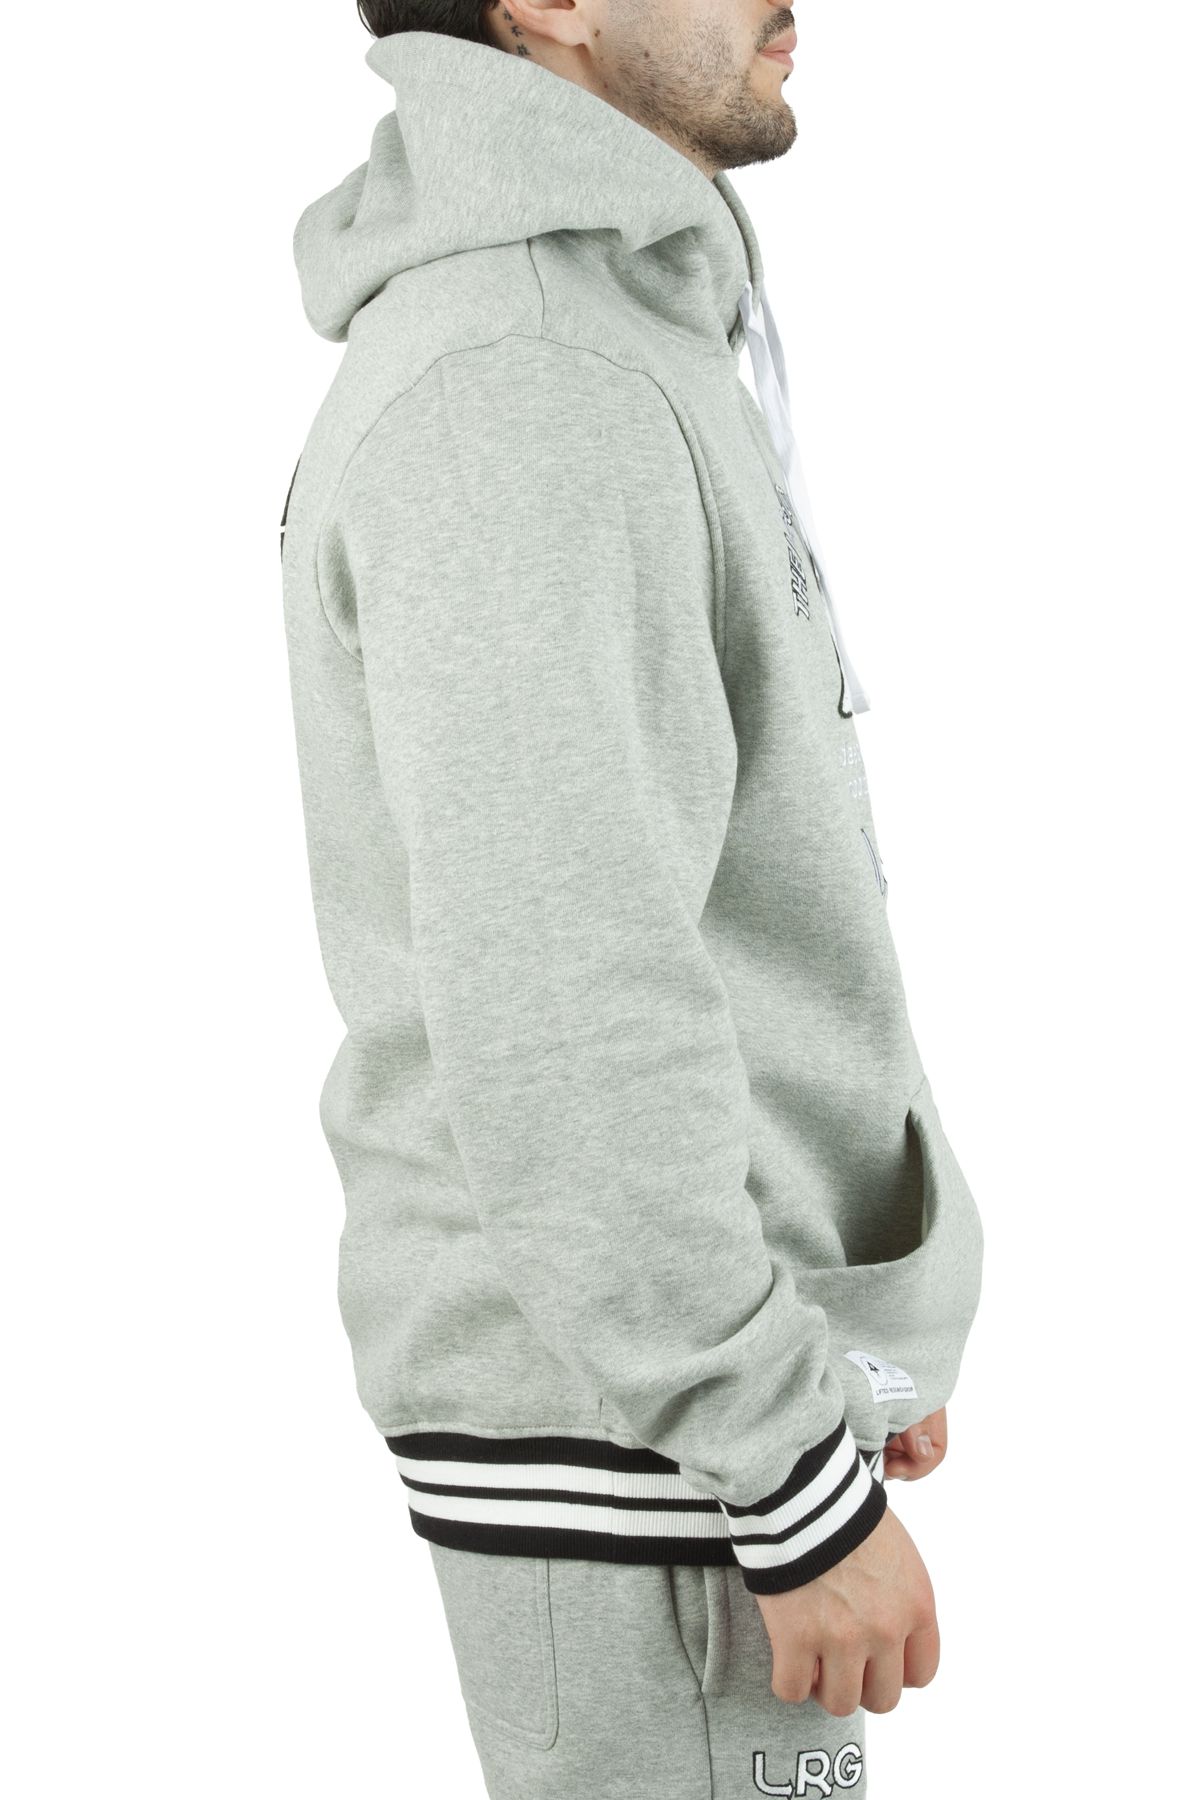 LRG Stronger L Branches Pullover Hoodie L15QMLOXX - Shiekh